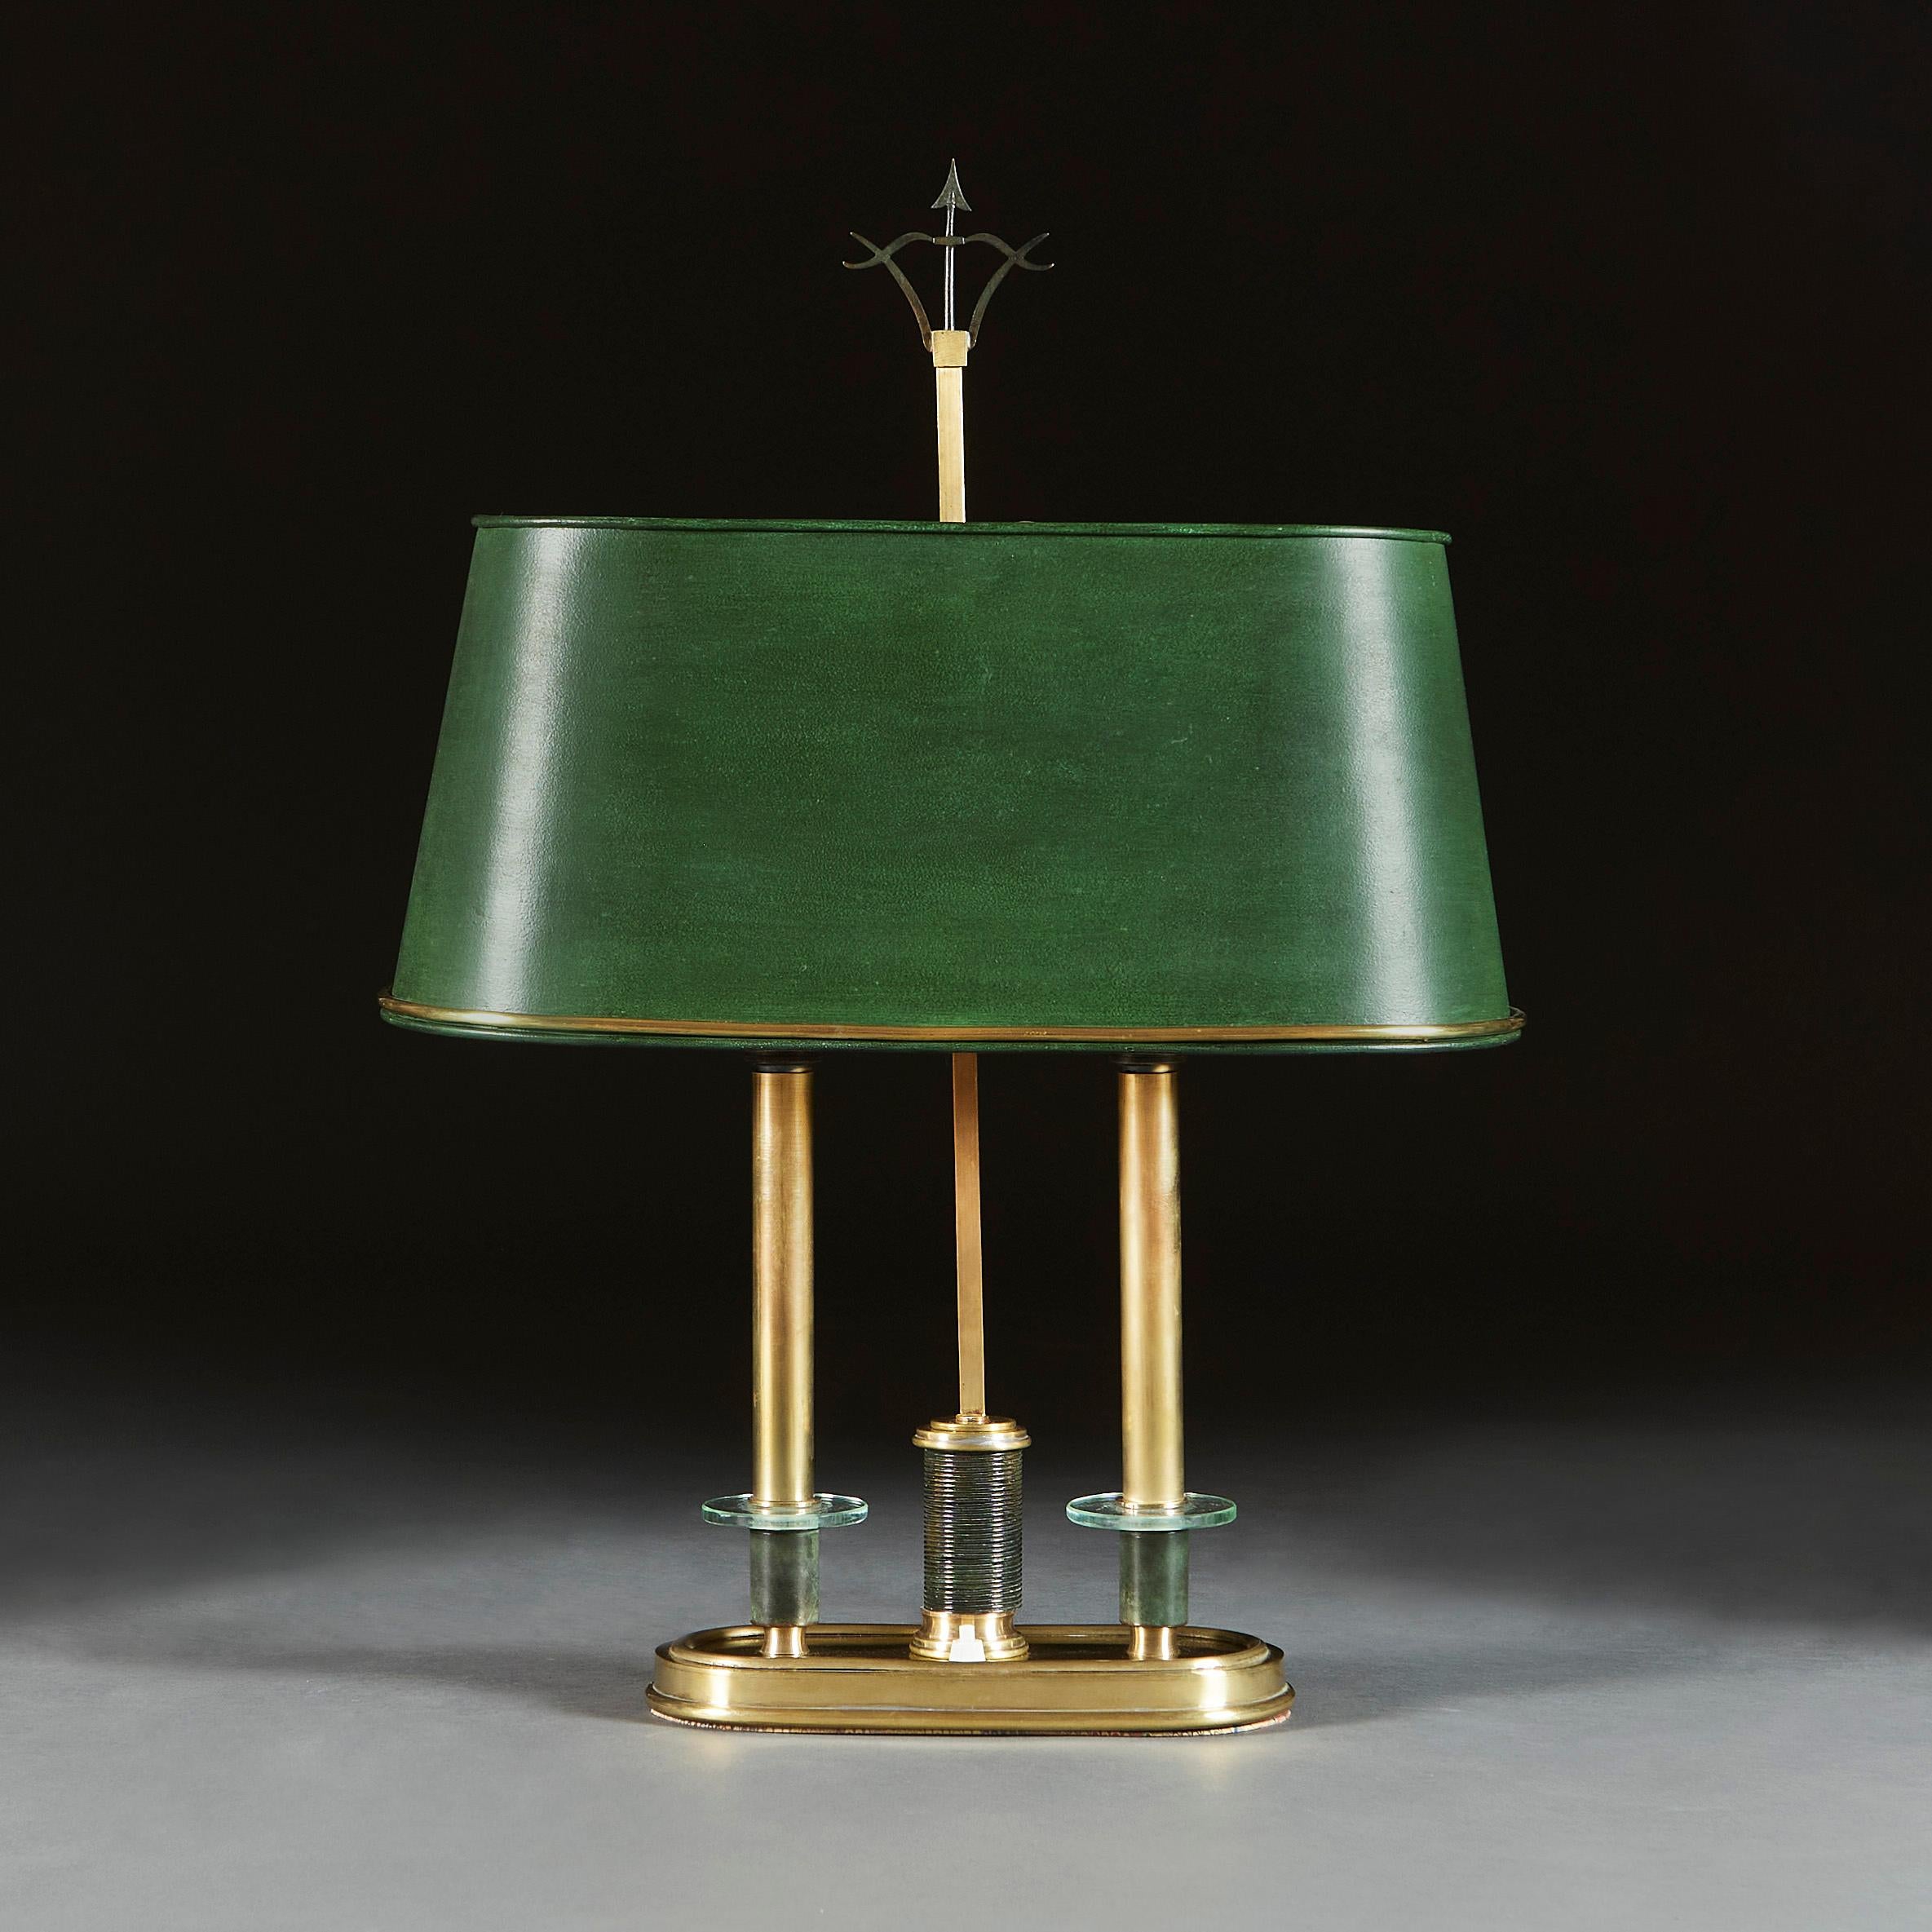 Italy, circa 1950

An unusual midcentury bouillotte lamp of oval form with green tole shade, with oval brass base supporting two brass candles, each with bronze sconces with glass discs.

Total height 62.00cm
Width 44.00cm
Depth 16.00cm.

Please